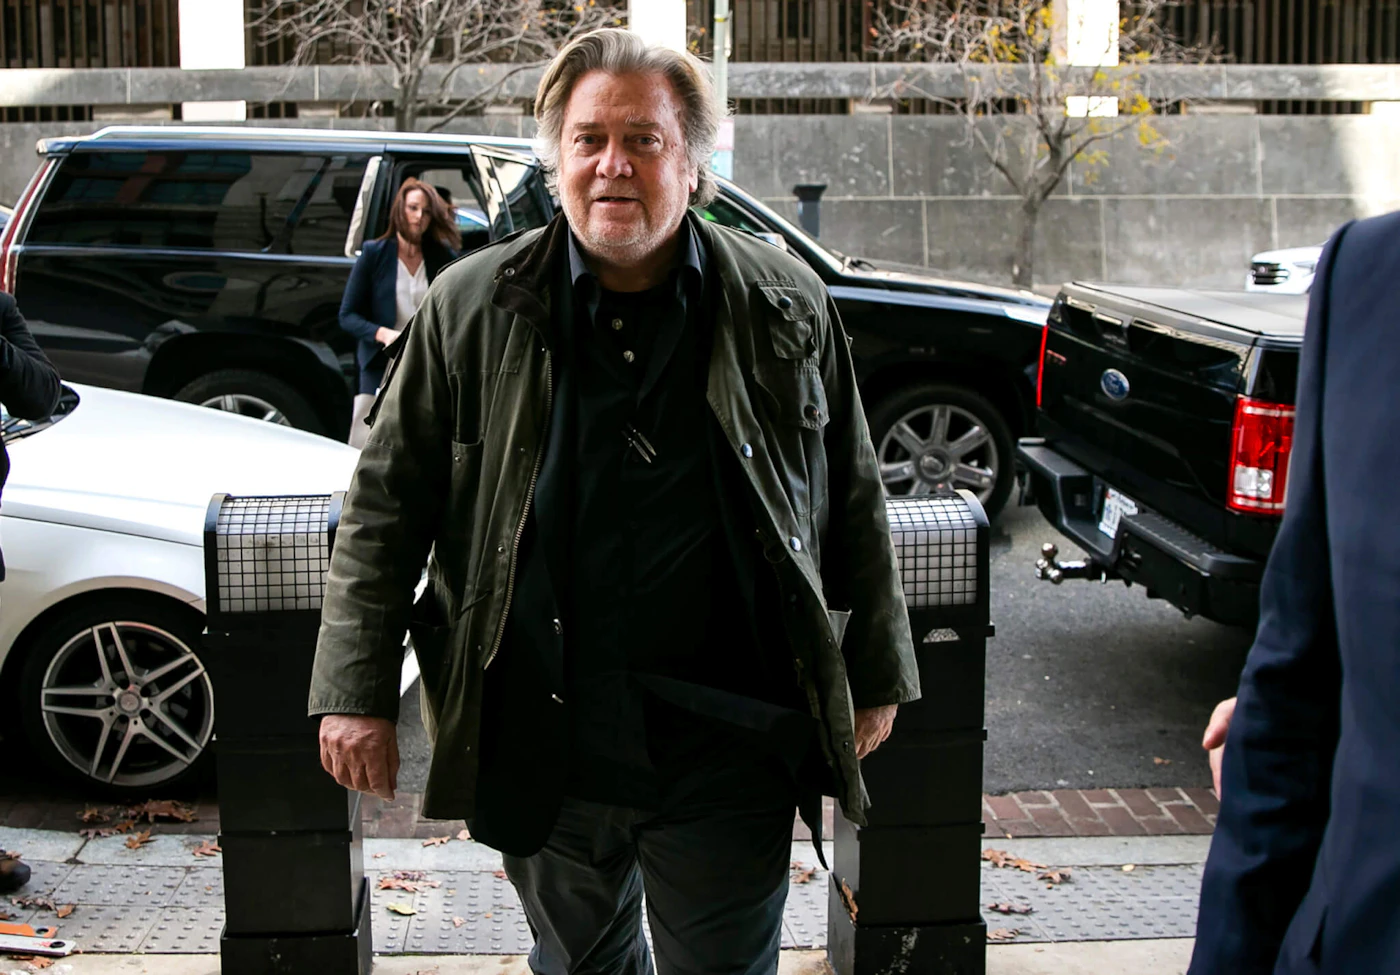 FILE - In this Nov. 8, 2019 file photo, former White House strategist Steve Bannon arrives to testify at the trial of Roger Stone, at federal court in Washington. Bannon was arrested Thursday, Aug. 20, 2020, on charges that he and three others ripped off donors to an online fundraising scheme “We Build The Wall.” The charges were contained in an indictment unsealed in Manhattan federal court.  (AP Photo/Al Drago, File)